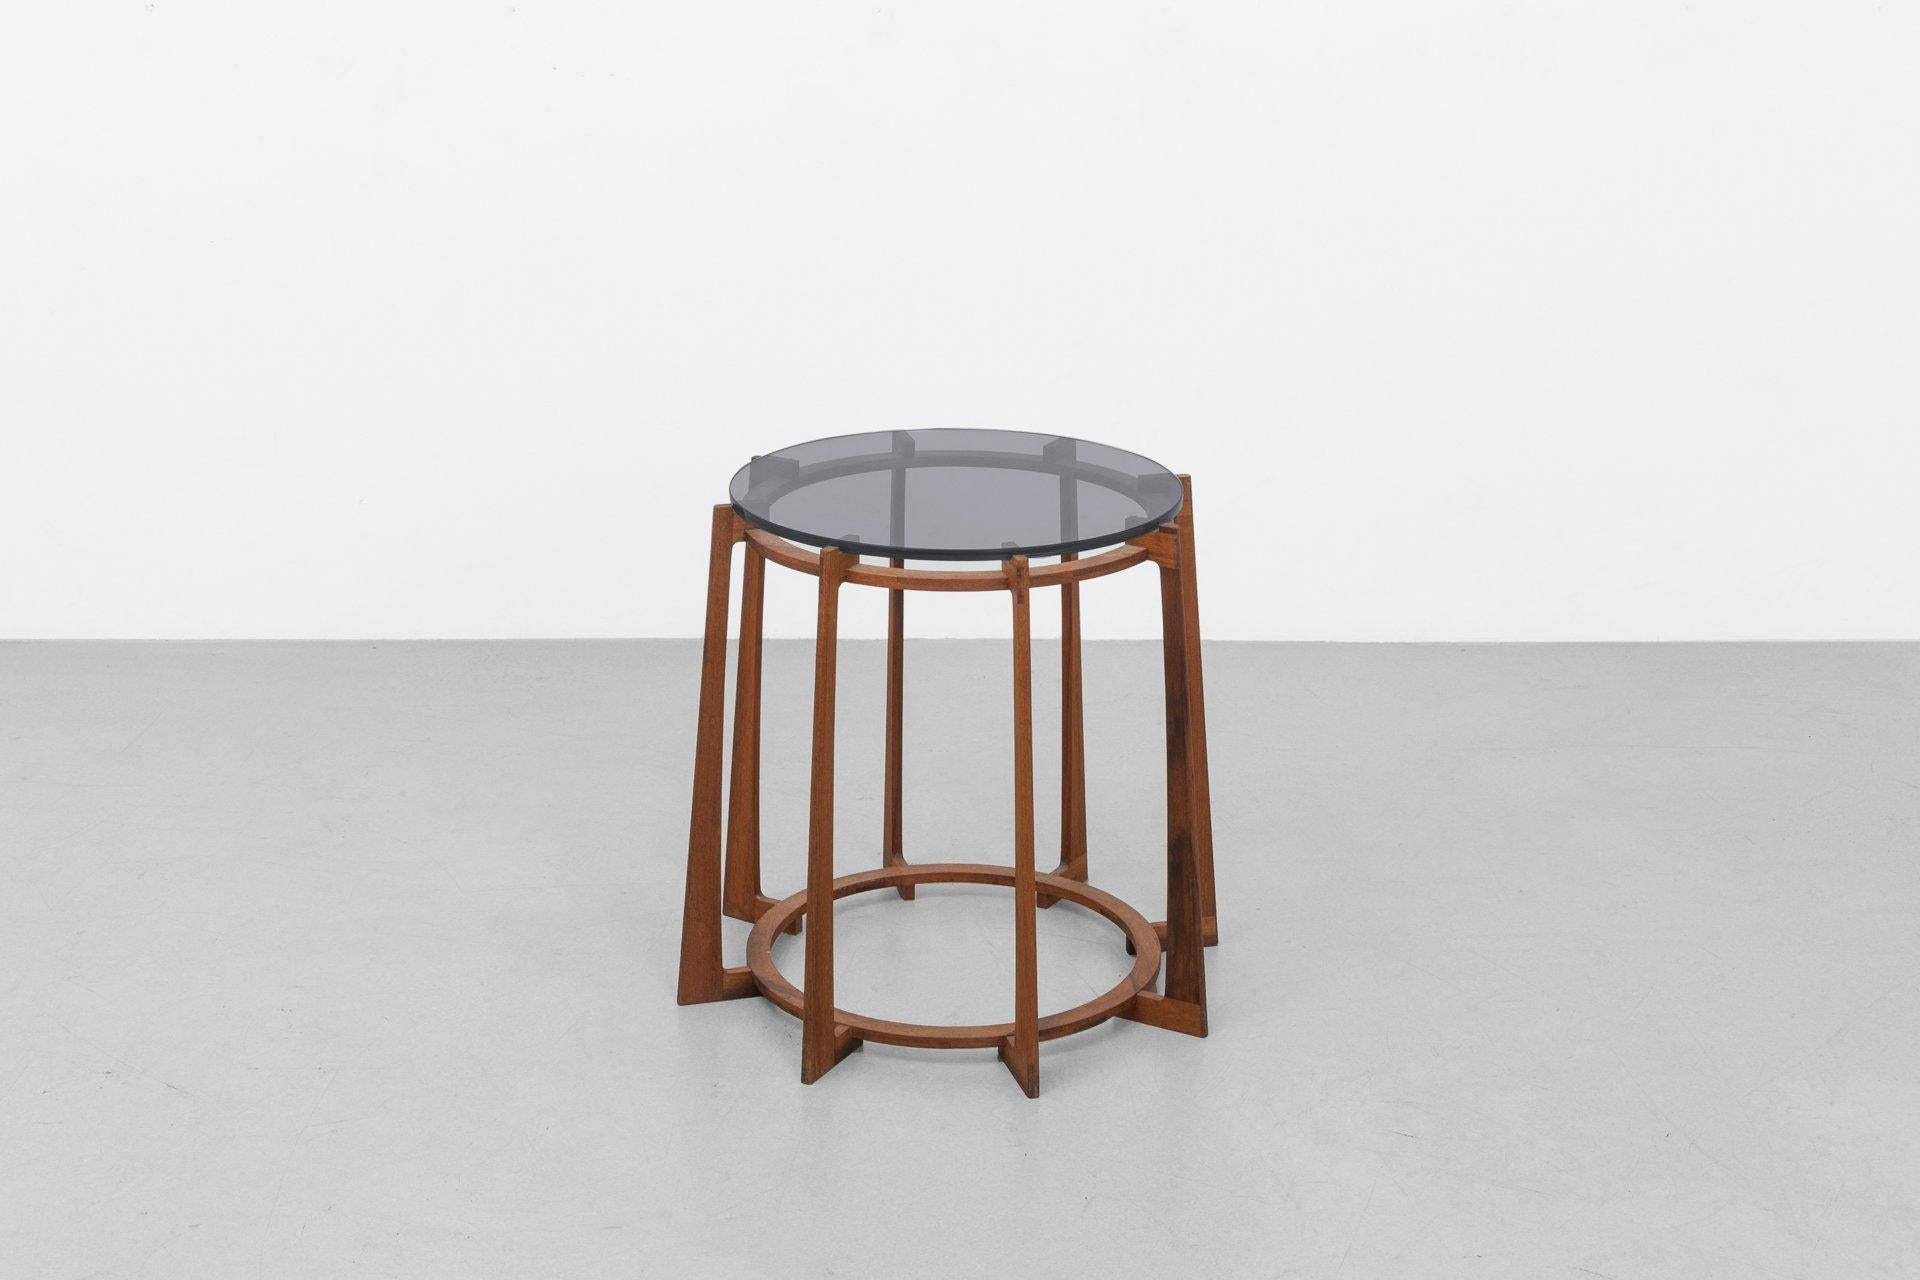 The 16/45 end table strikes a balance between sleek and sturdy. Crafted from walnut, the table's lean, tapered base cradles a smoked grey glass top. Its graceful and understated form adds sophistication to any space. 

The War Craft Collection was